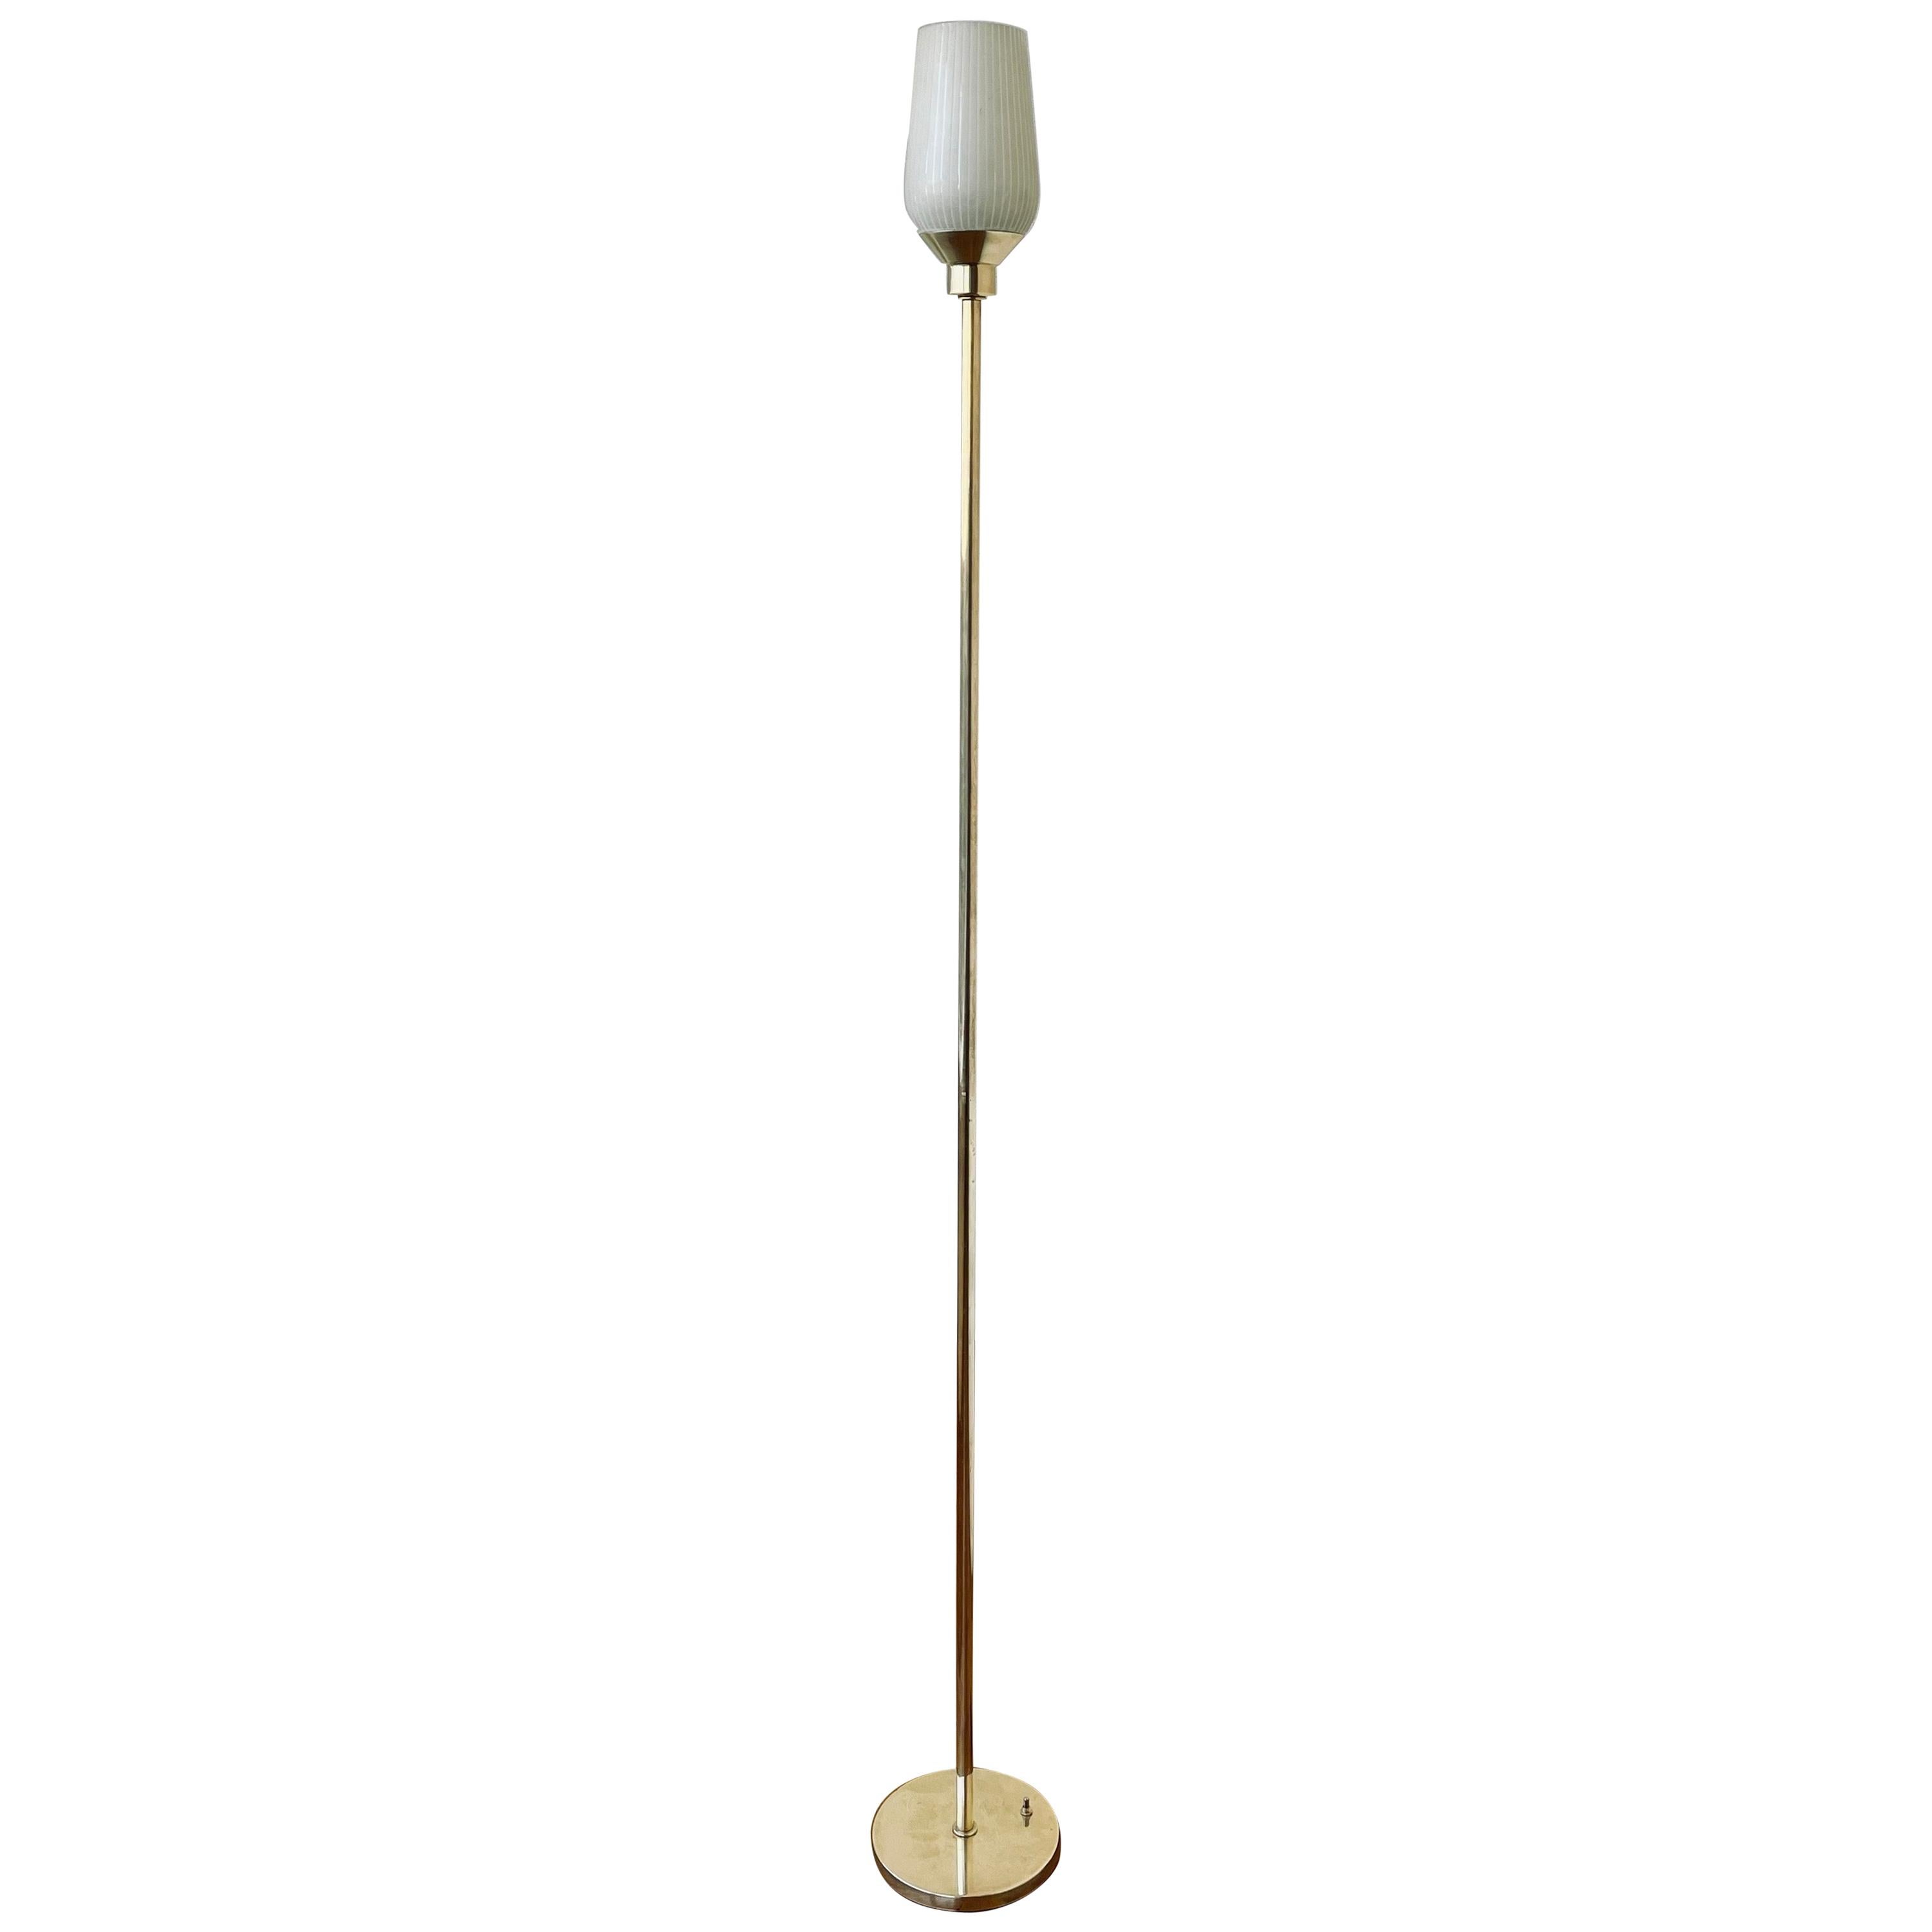 American Midcentury Brass and Glass Uplight Torchiere Floor Lamp